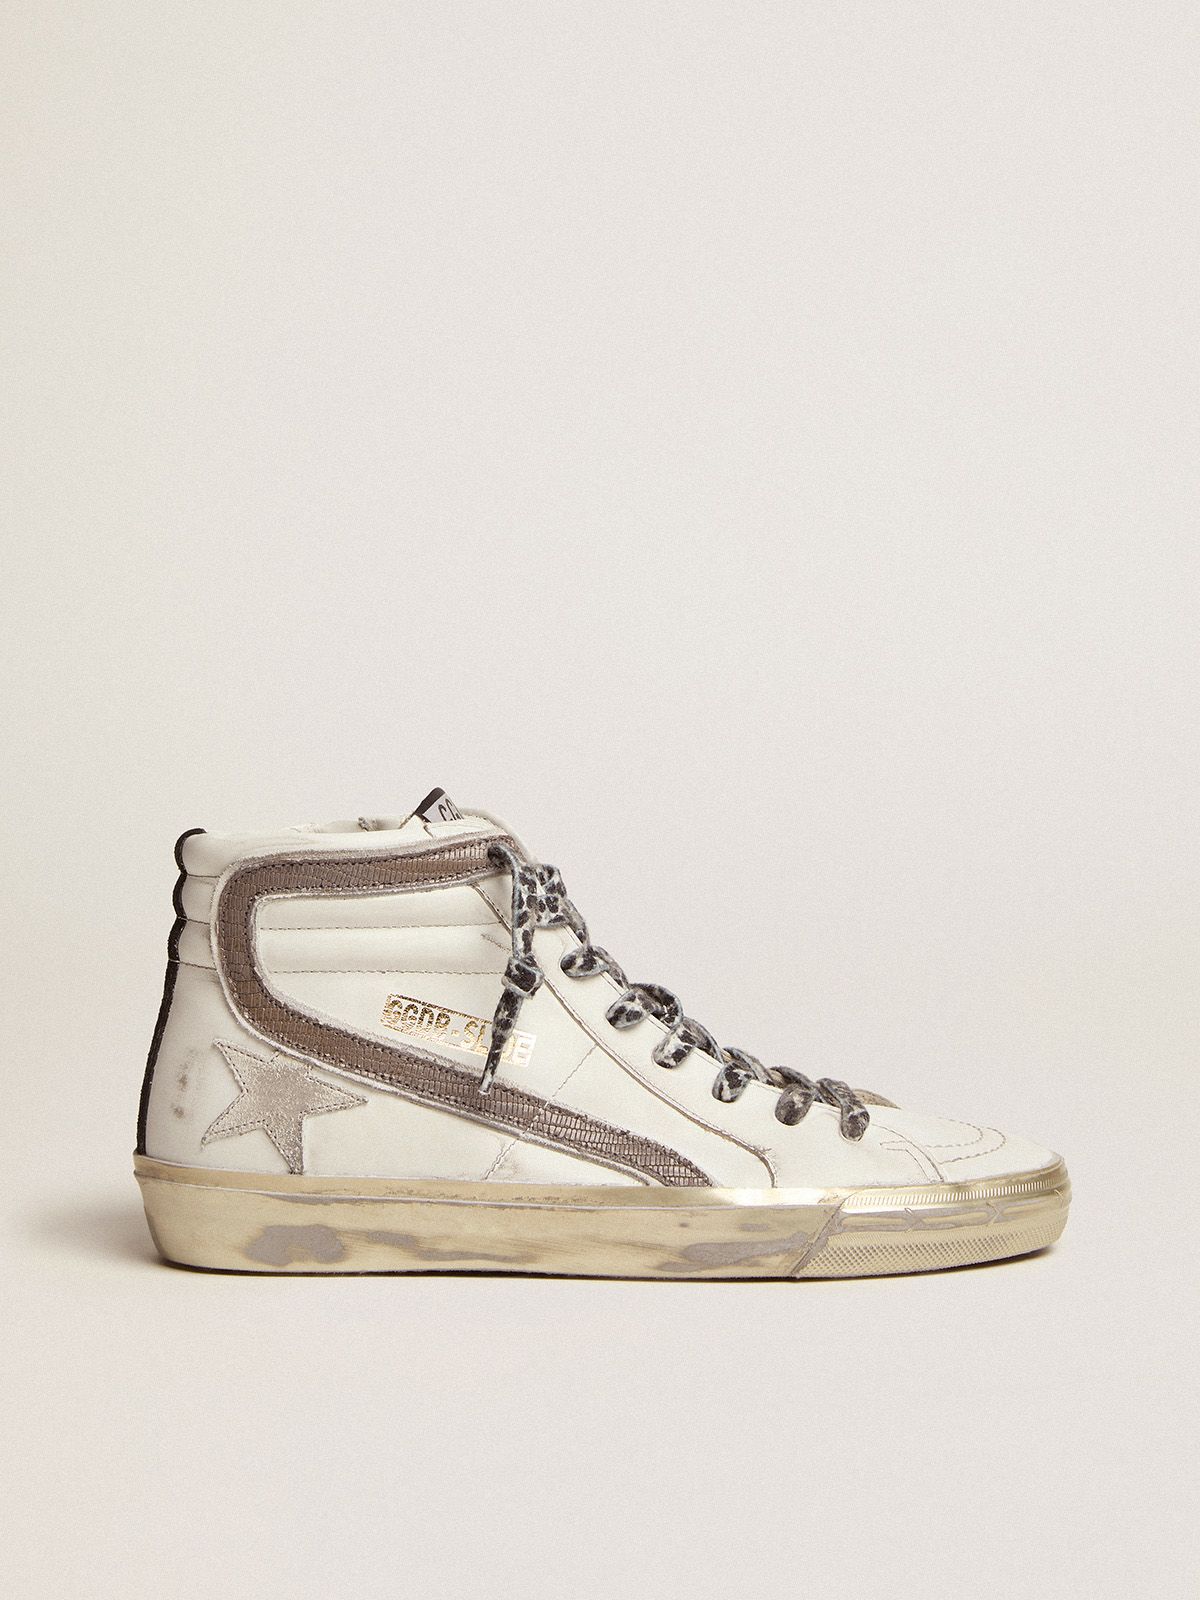 golden goose with suede star and Slide dove-gray white flash leather sneakers lizard-print